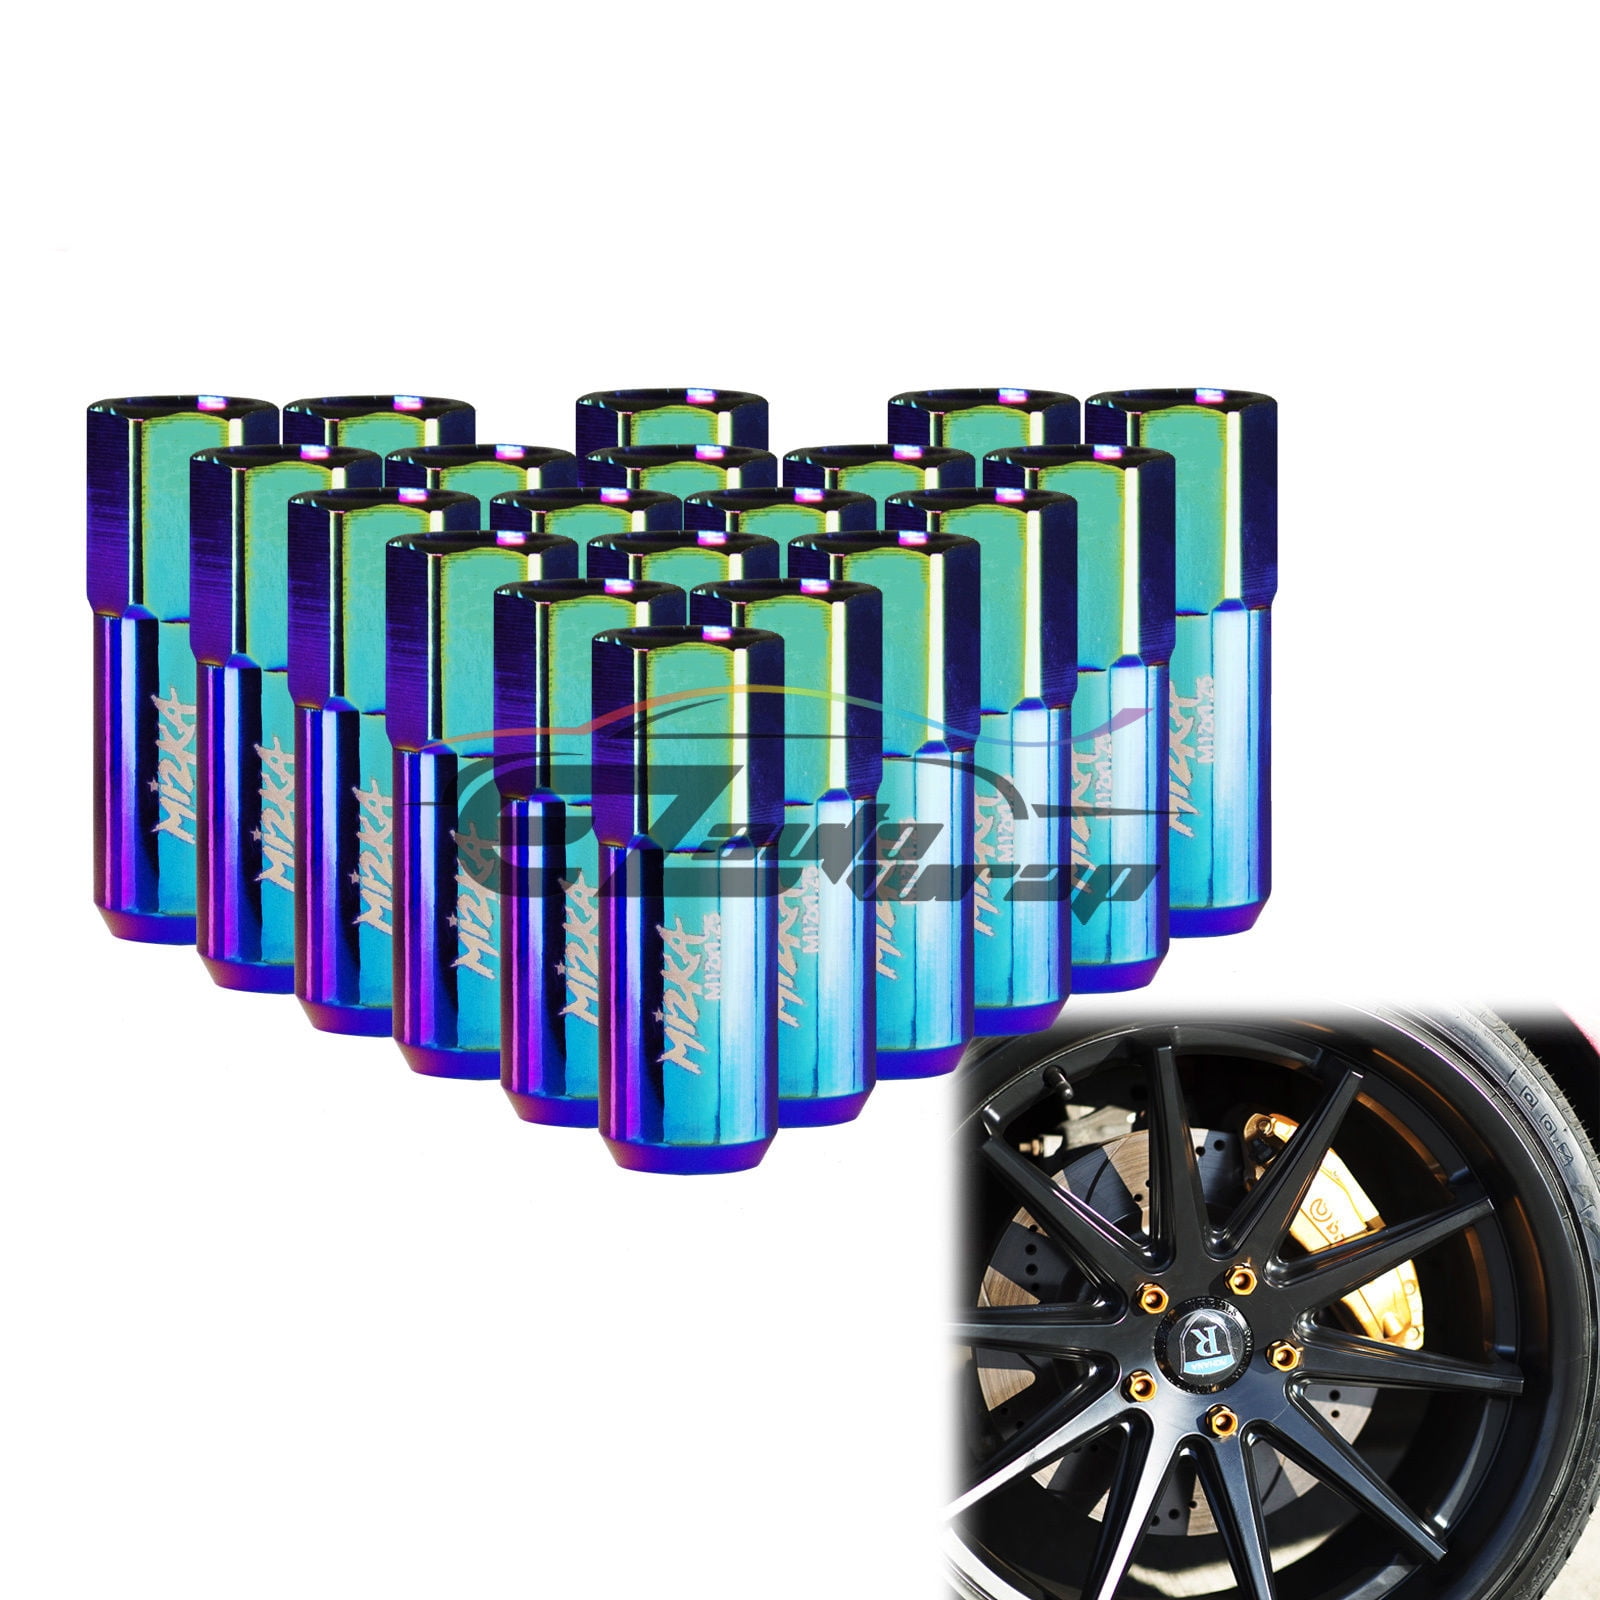 OPEN END NEO CHROME FINISH EXTENDED LUG NUTS12X1.5 FIT MAZDA MITSUBISHI 20 